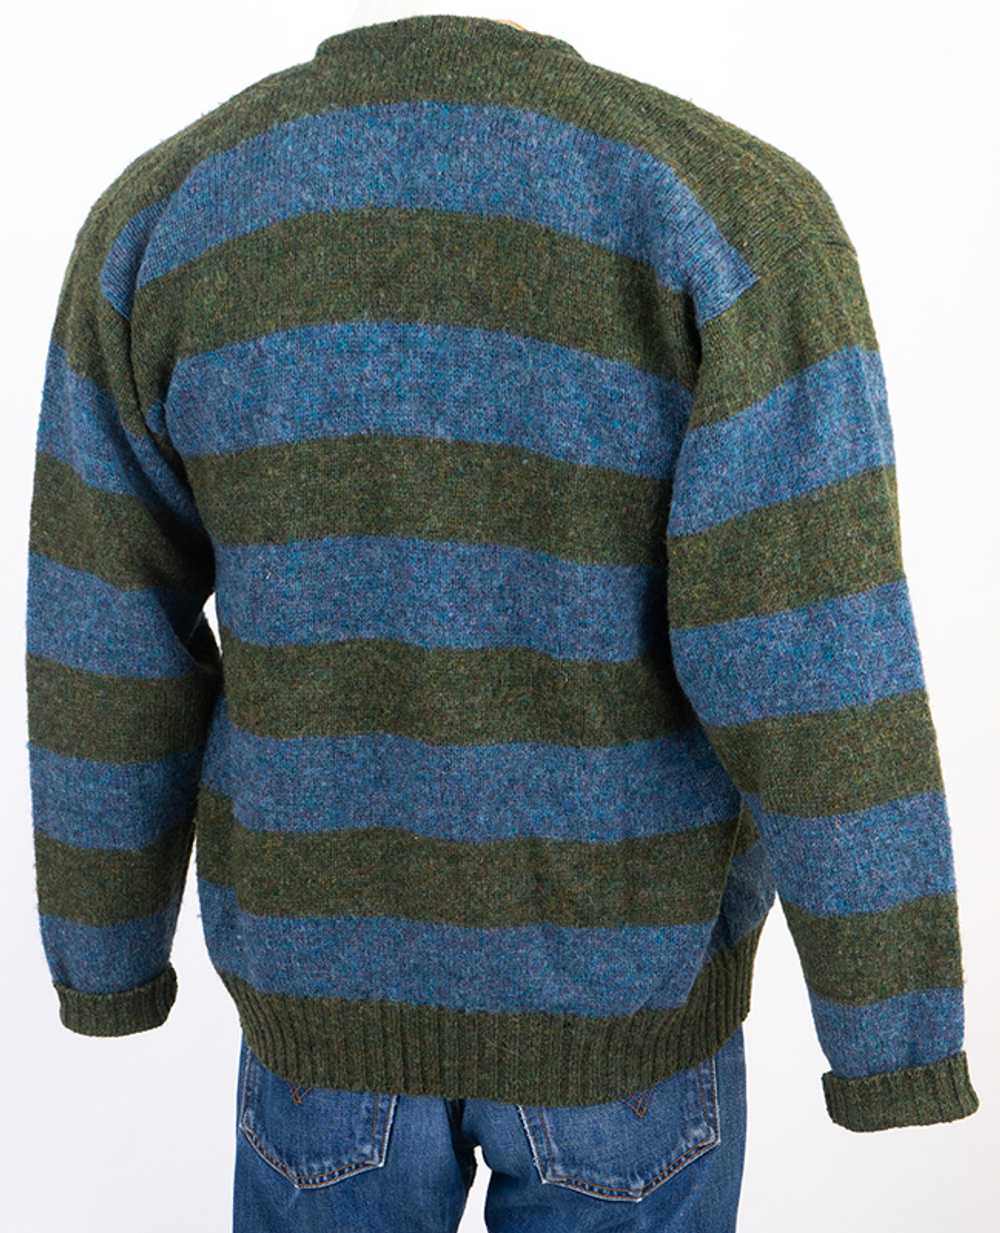 Striped 1960s Mohair Blend Cardigan - image 2